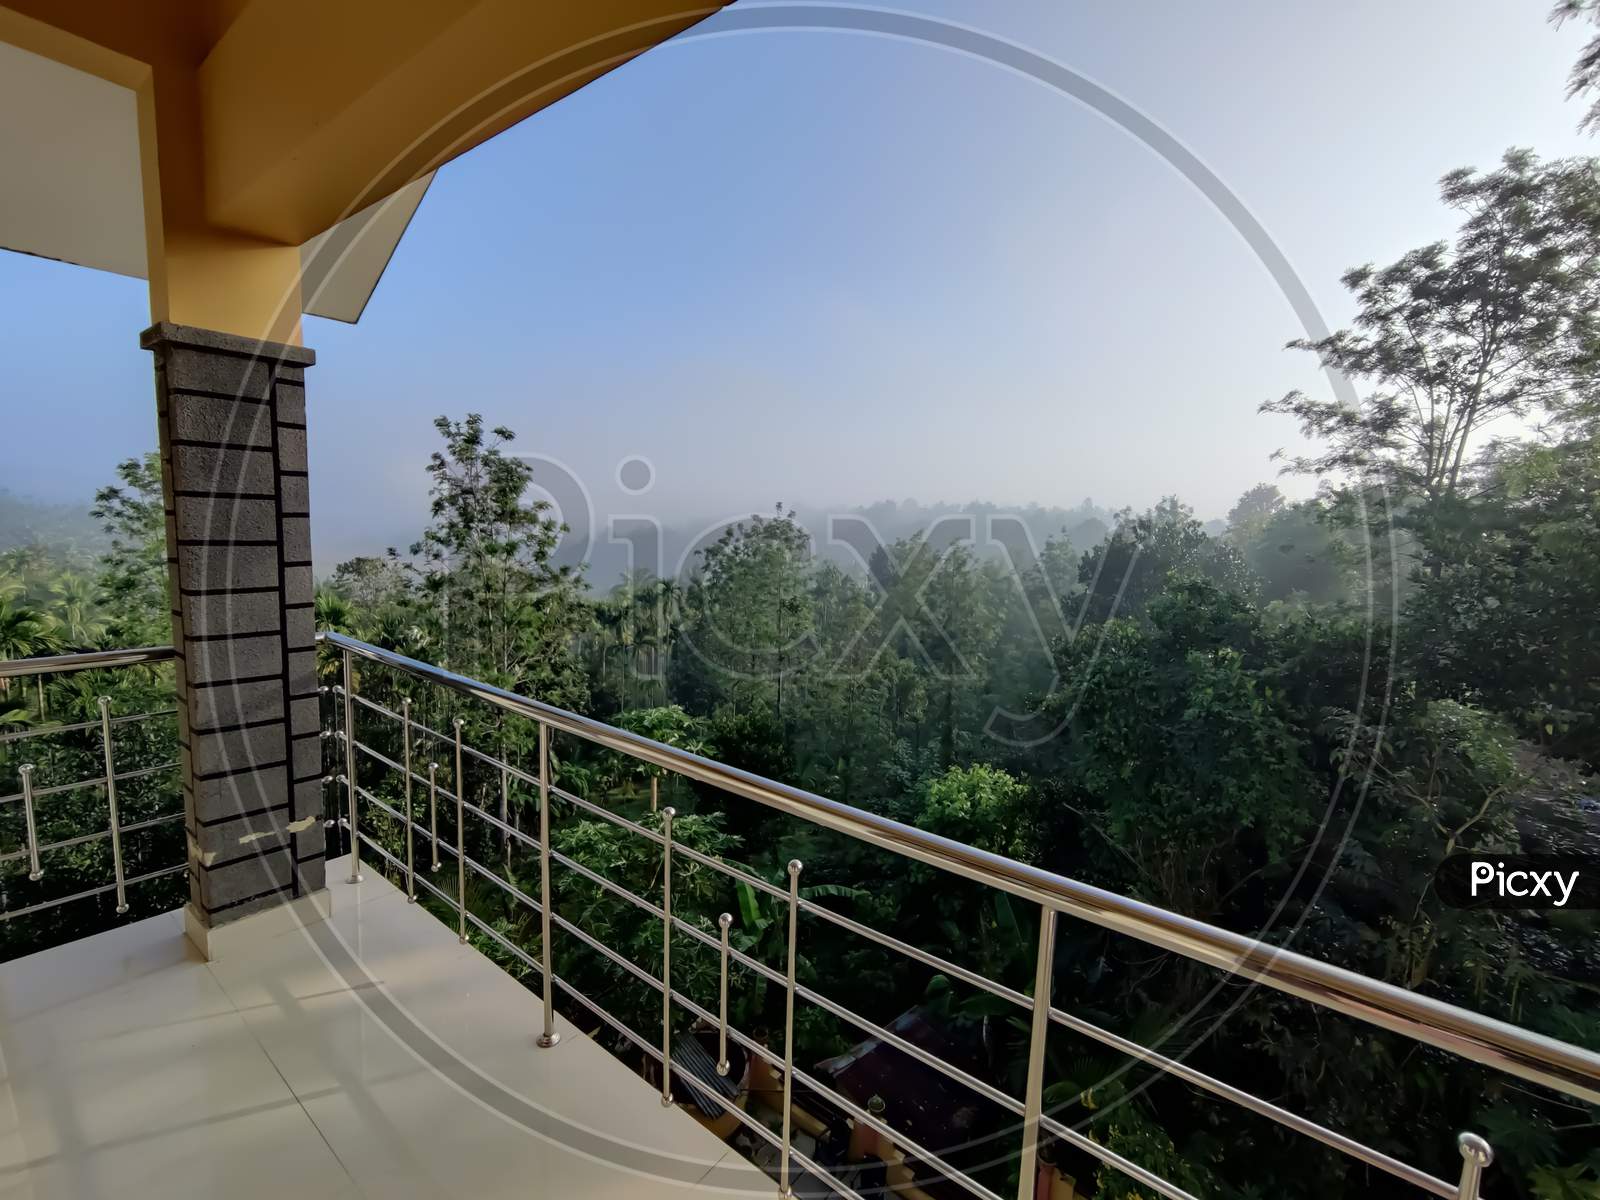 Amazing Nature View From The Home Balcony